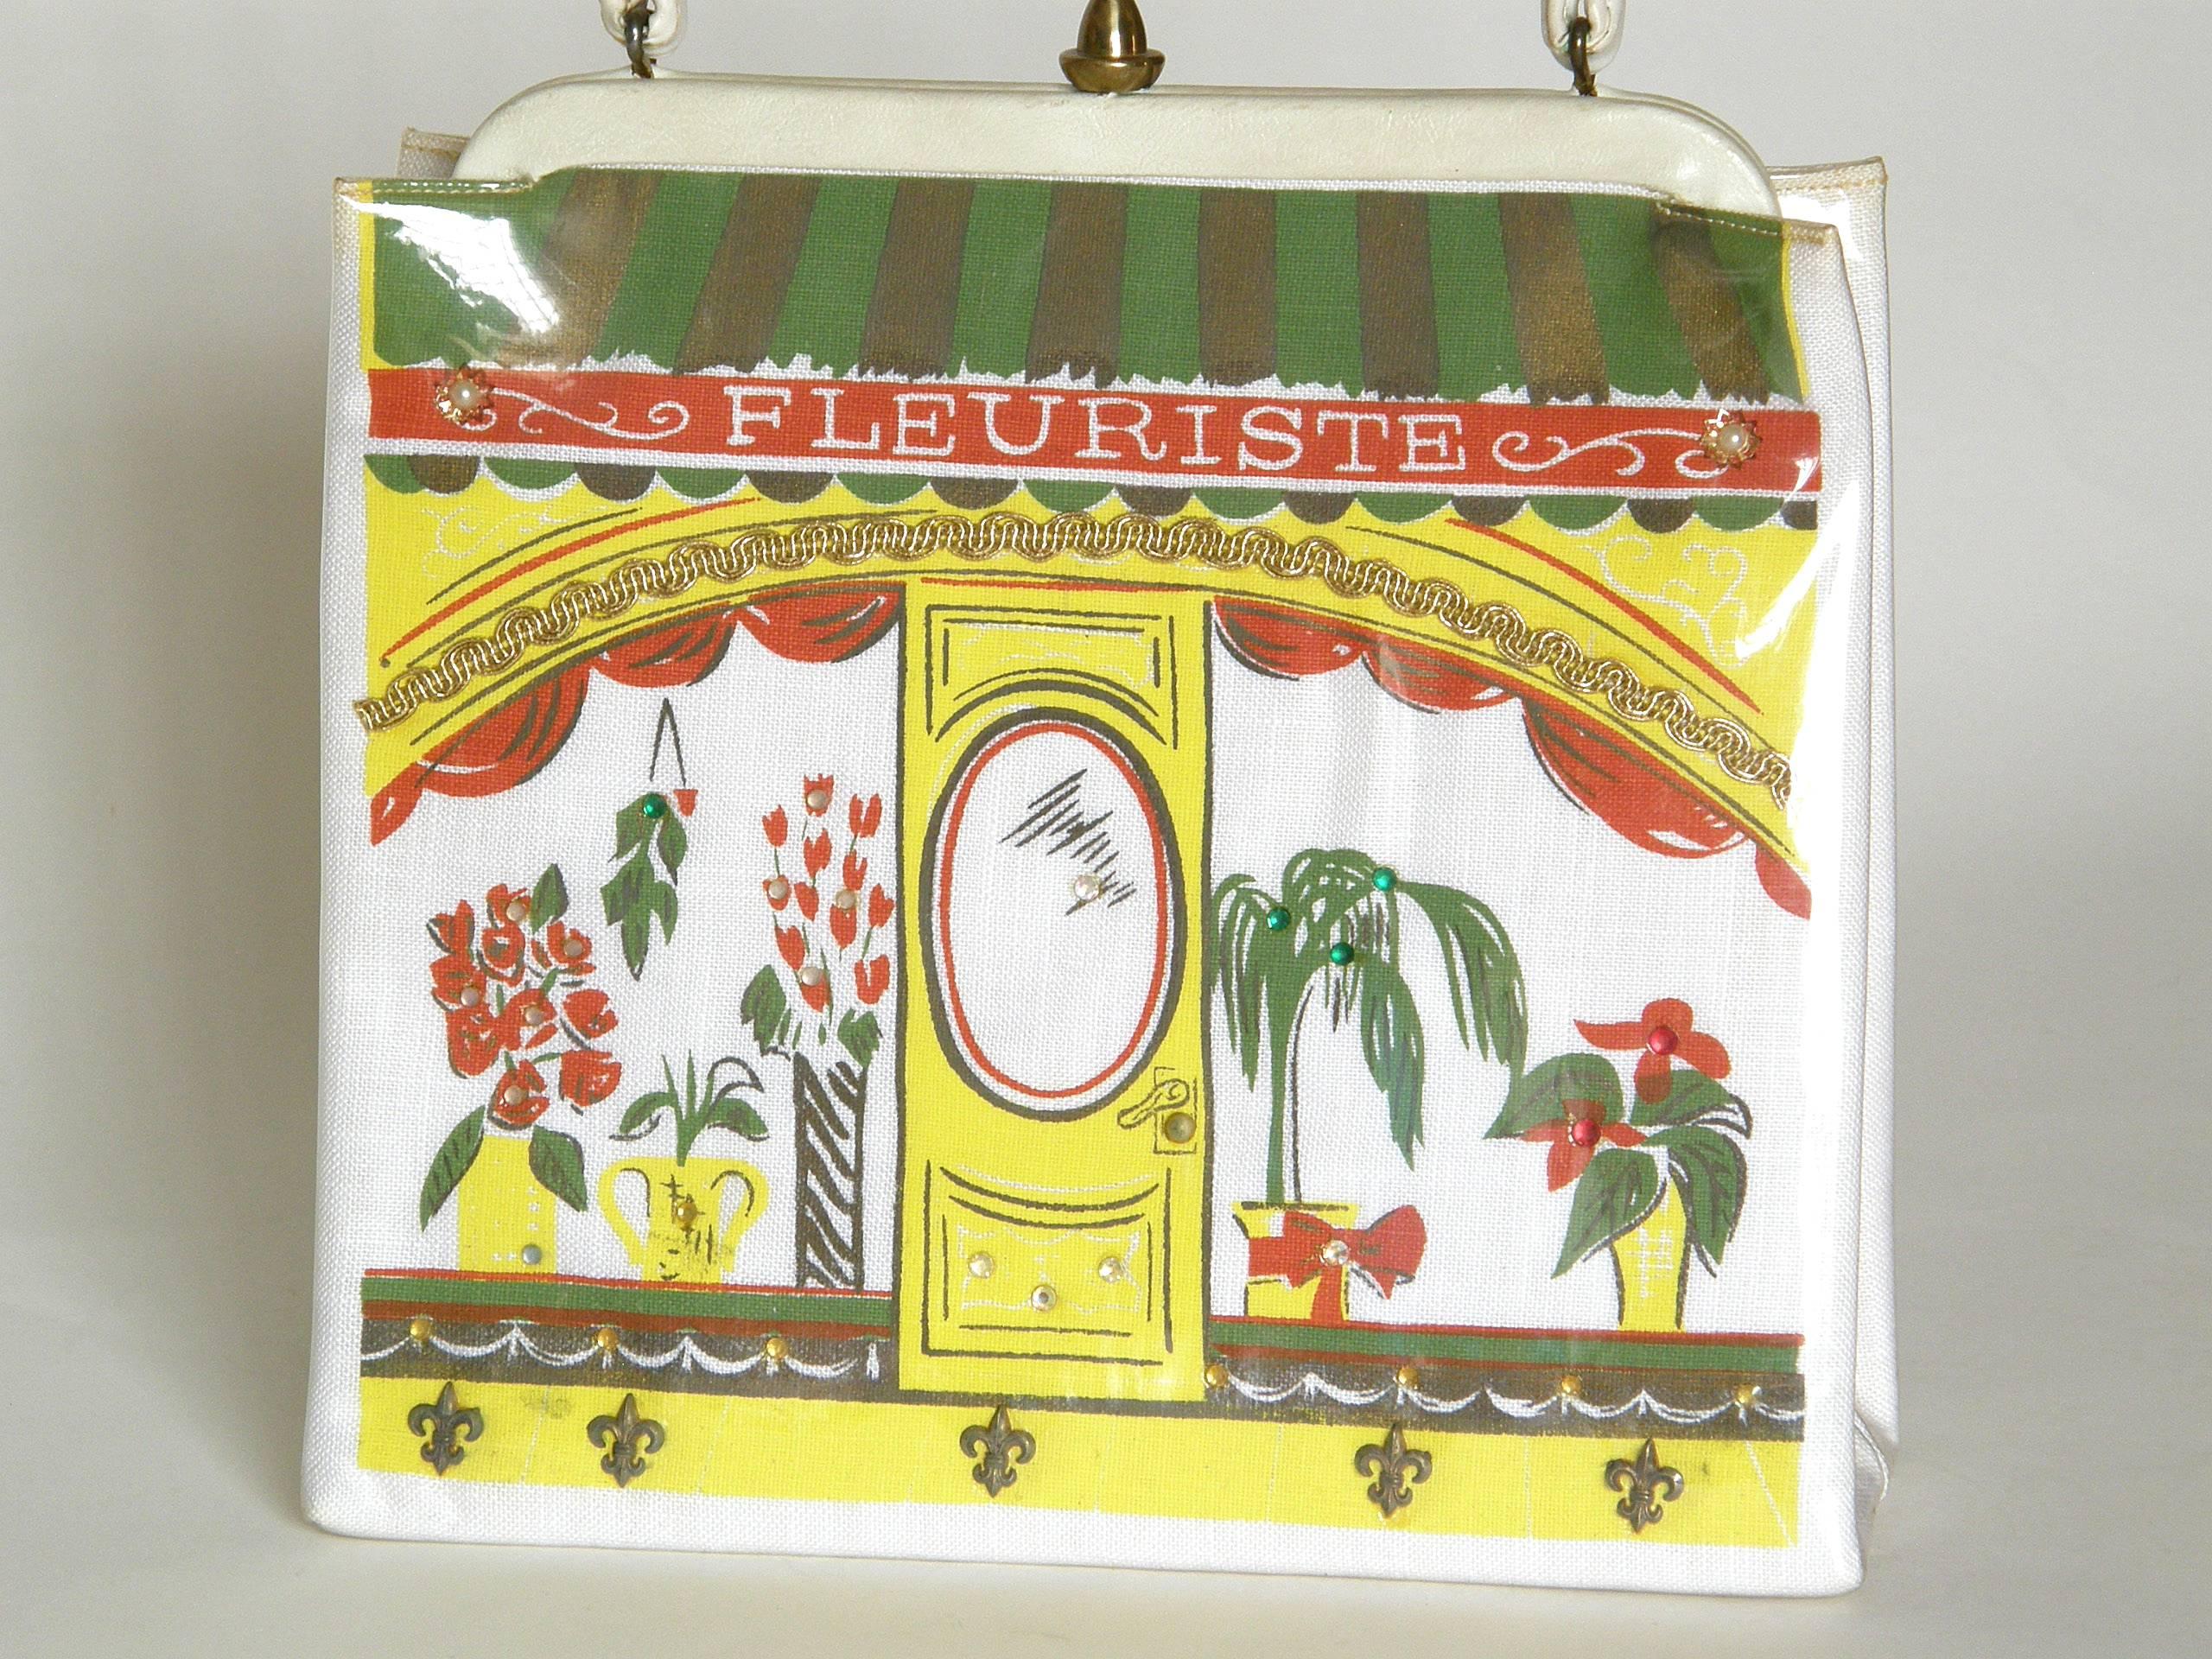 This charming, novelty handbag by Soure' is designed like a French florist shop. The front of the bag has a screen printed image of a storefront with flowers and plants in the display windows that flank the front door. The striped awning has the